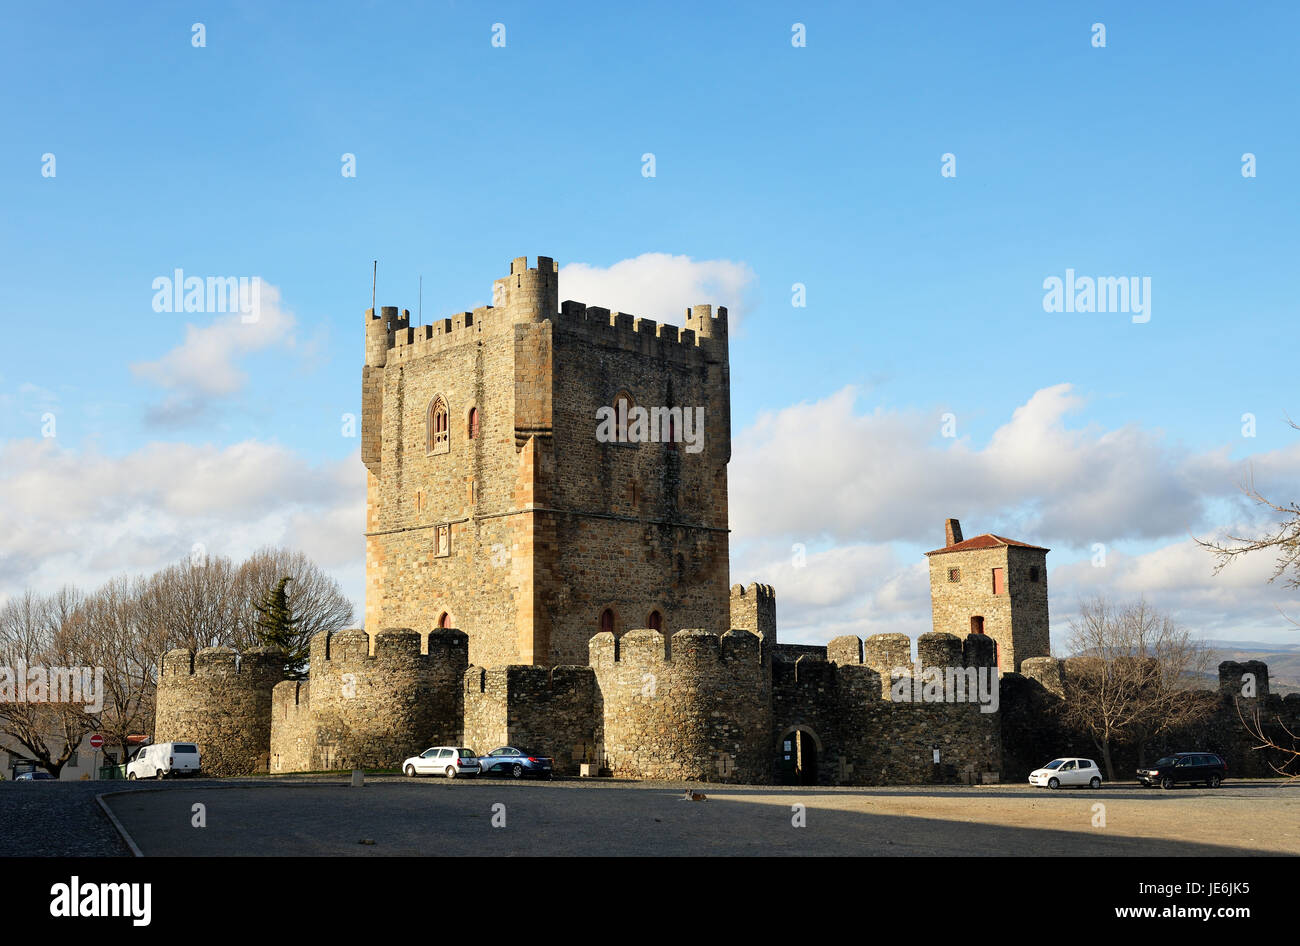 The castle of Braganca, one of the oldest cities in Portugal, Tras-os-Montes. Stock Photo